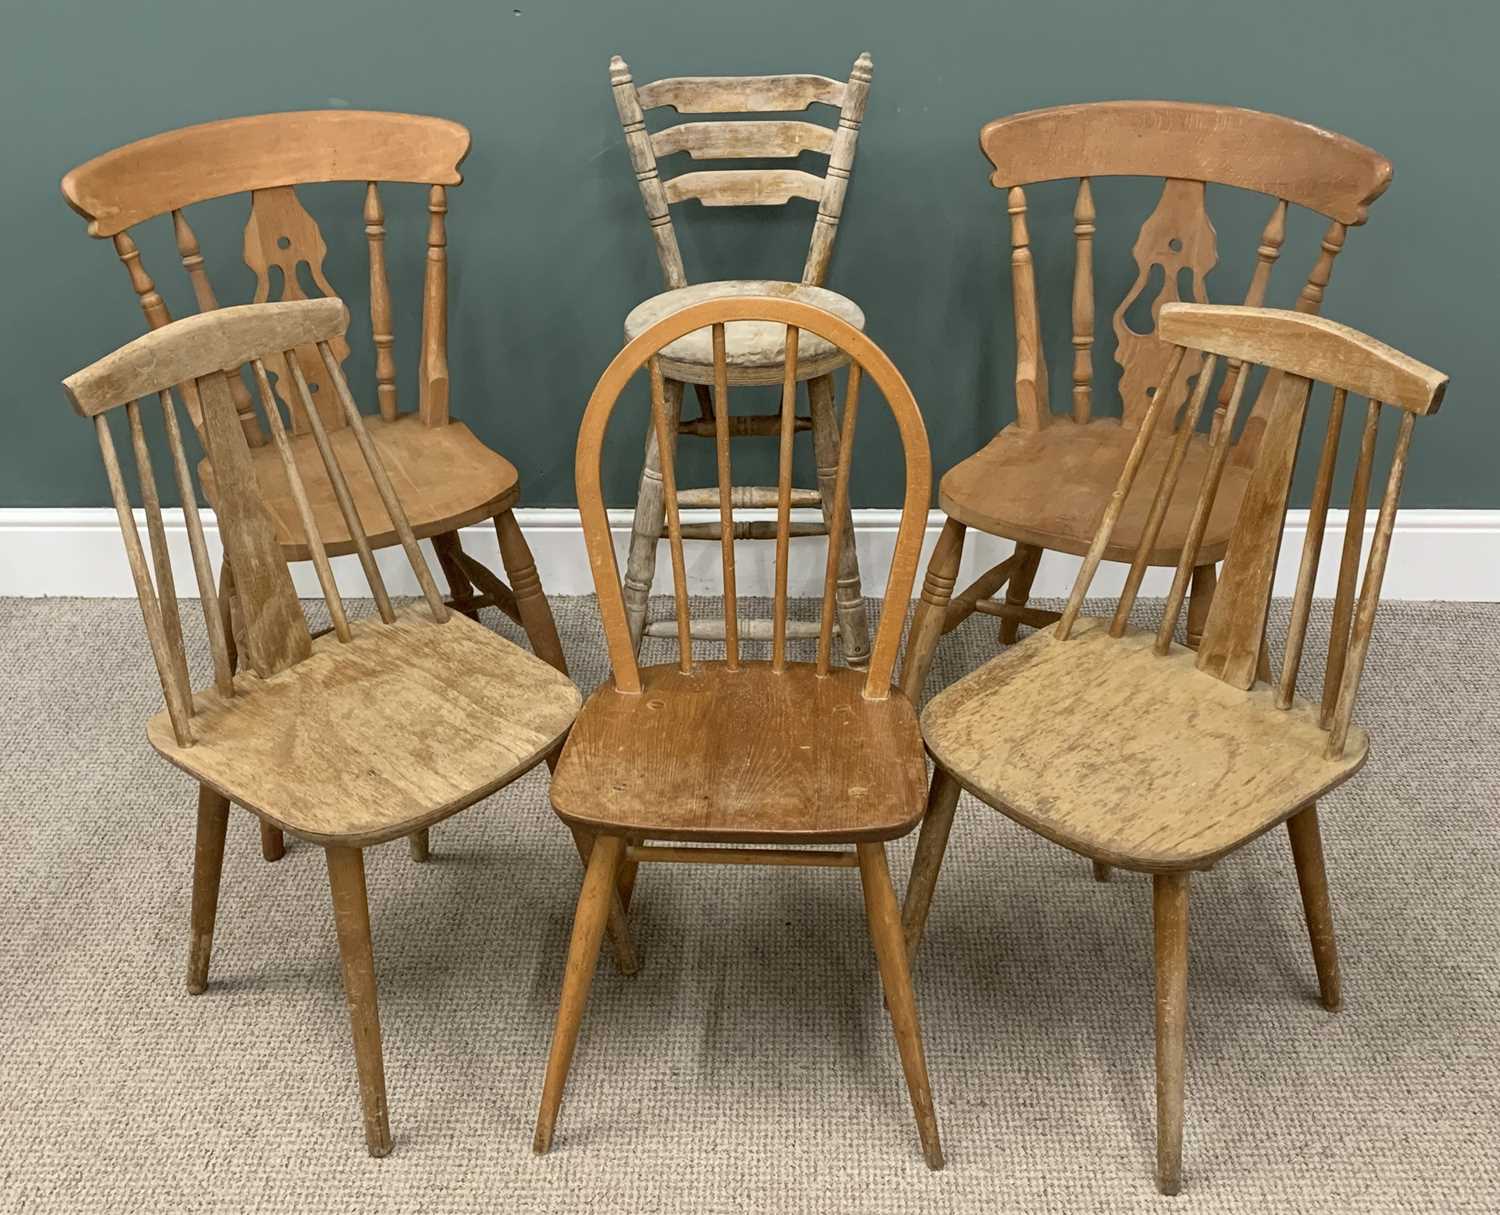 VARIOUS CHAIRS to include Windsor, wheelback, farmhouse and a carved Eisteddfod chair (13) - Image 6 of 8